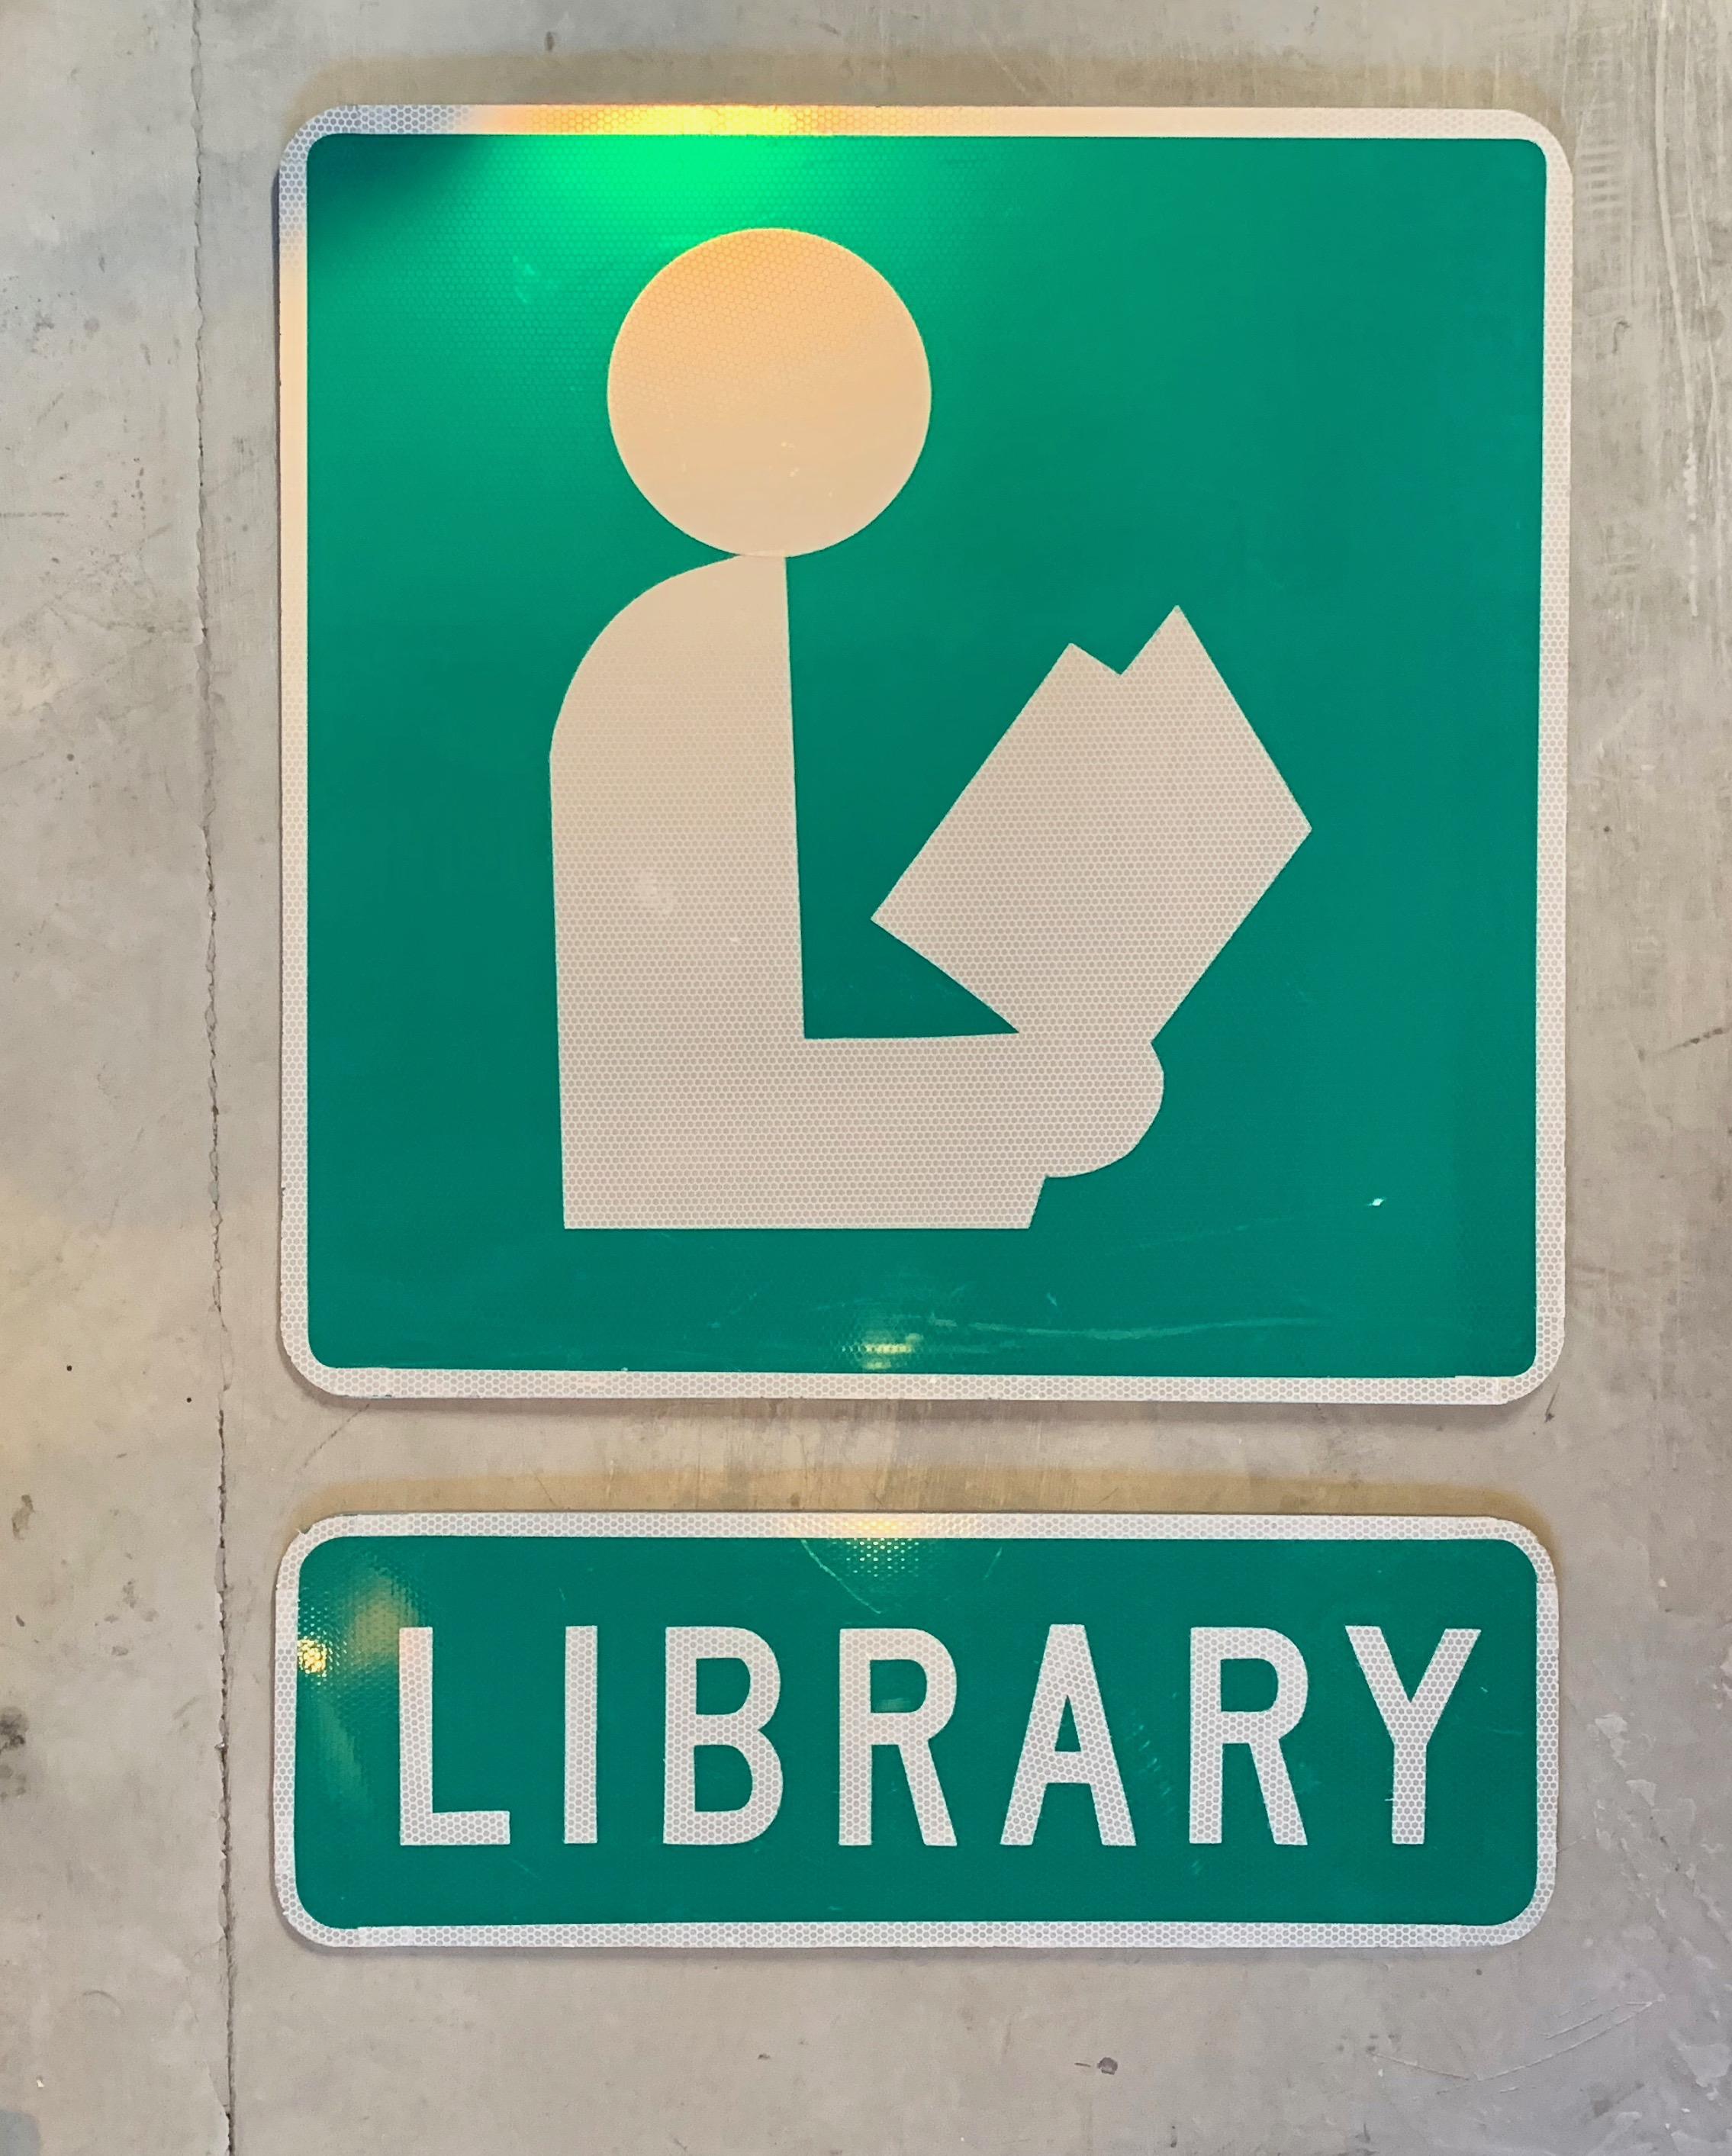 Vintage public library sign. Two pieces. Very good vintage condition. 32